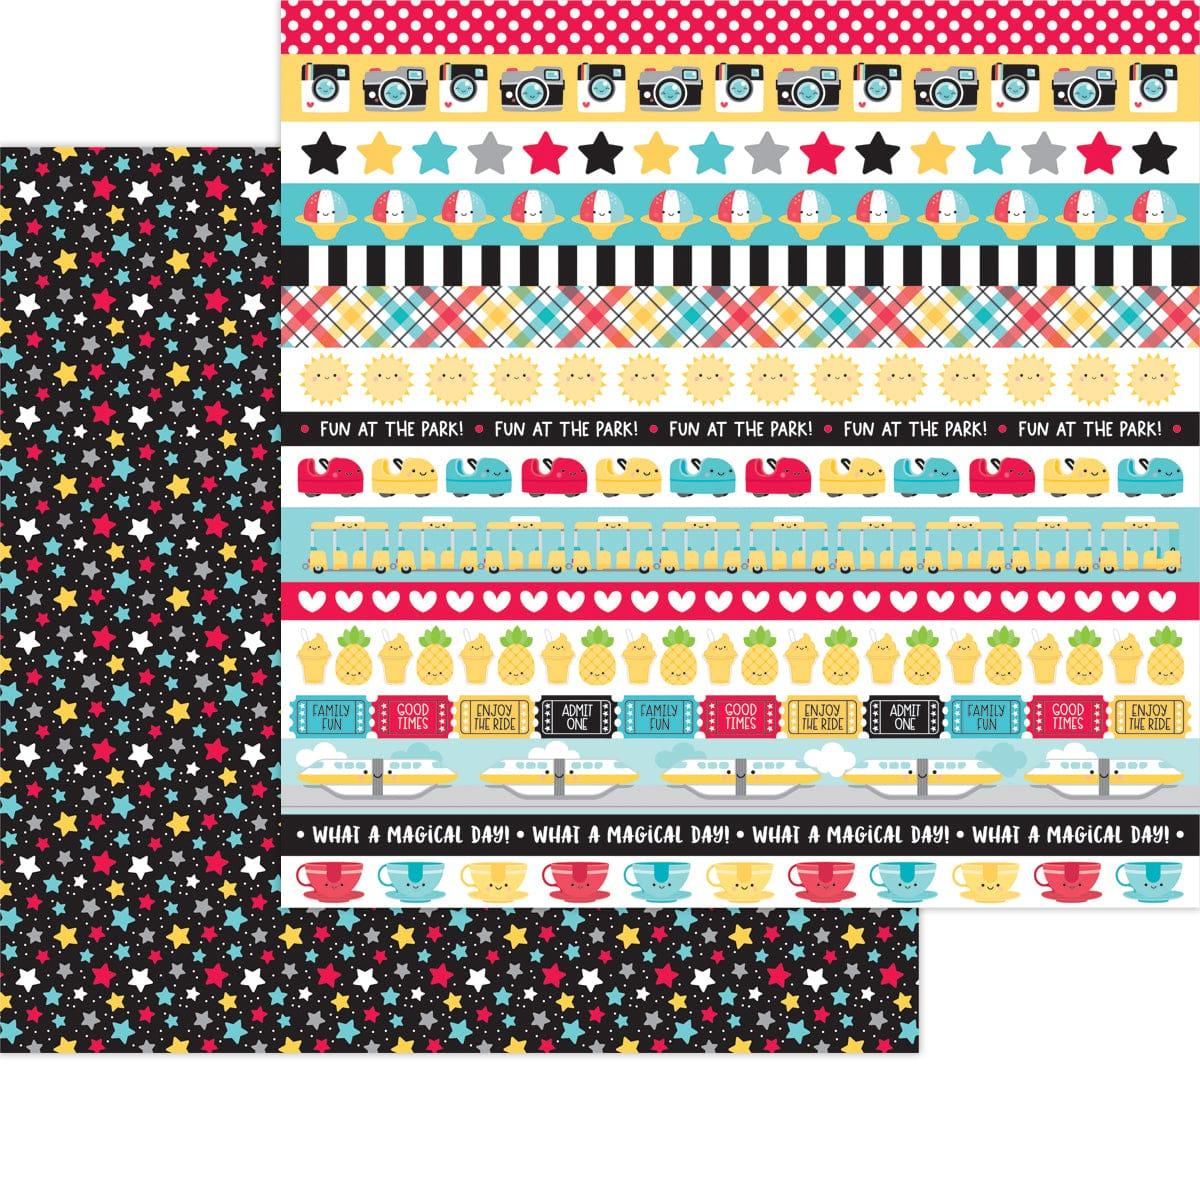 Fun at the Park Collection Movie Stars 12 x 12 Double-Sided Scrapbook Paper by Doodlebug Design - Scrapbook Supply Companies